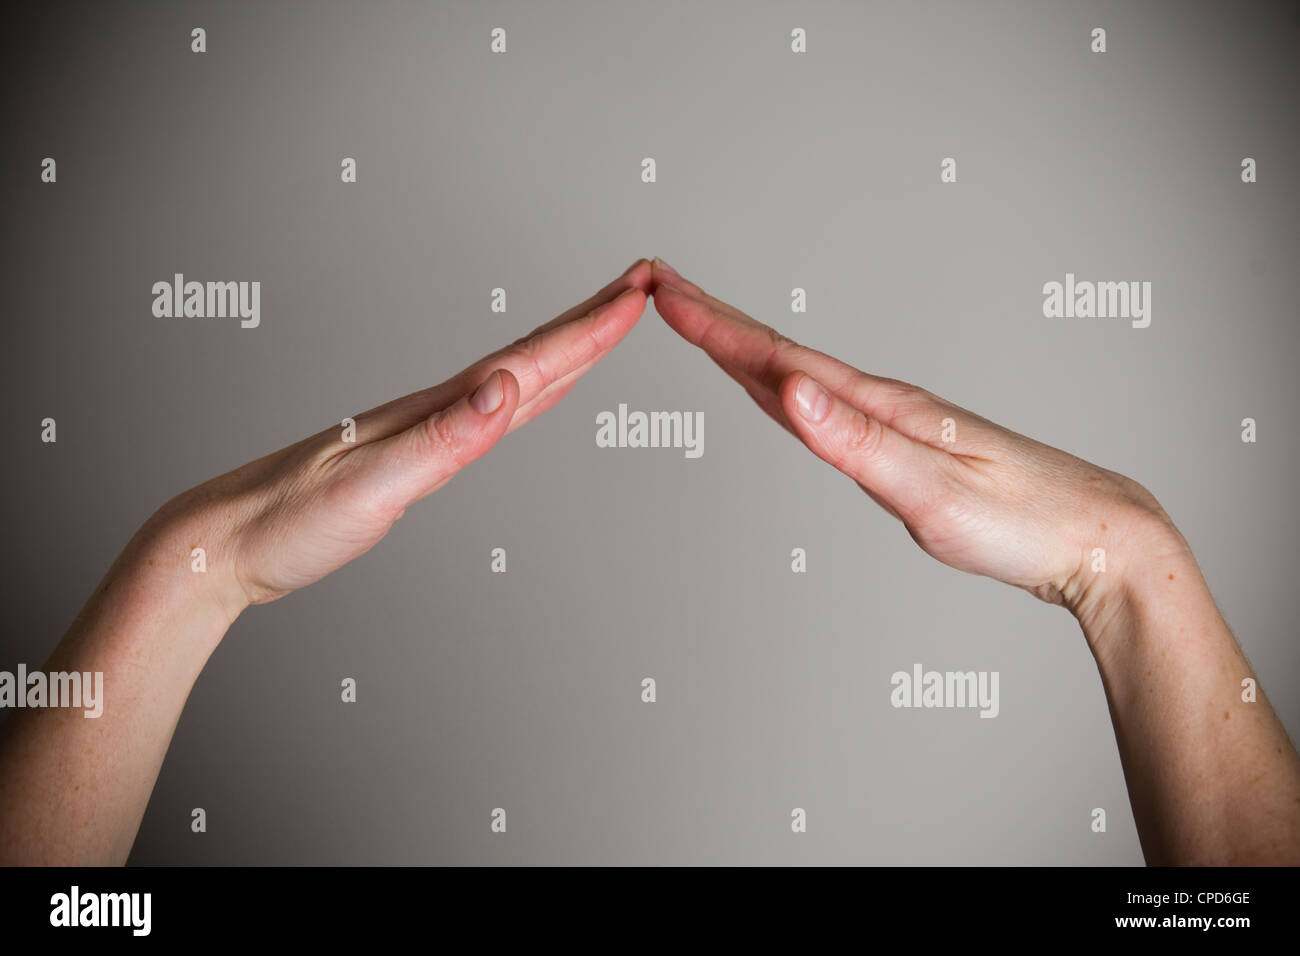 Two hands forming a bridge or roof Stock Photo